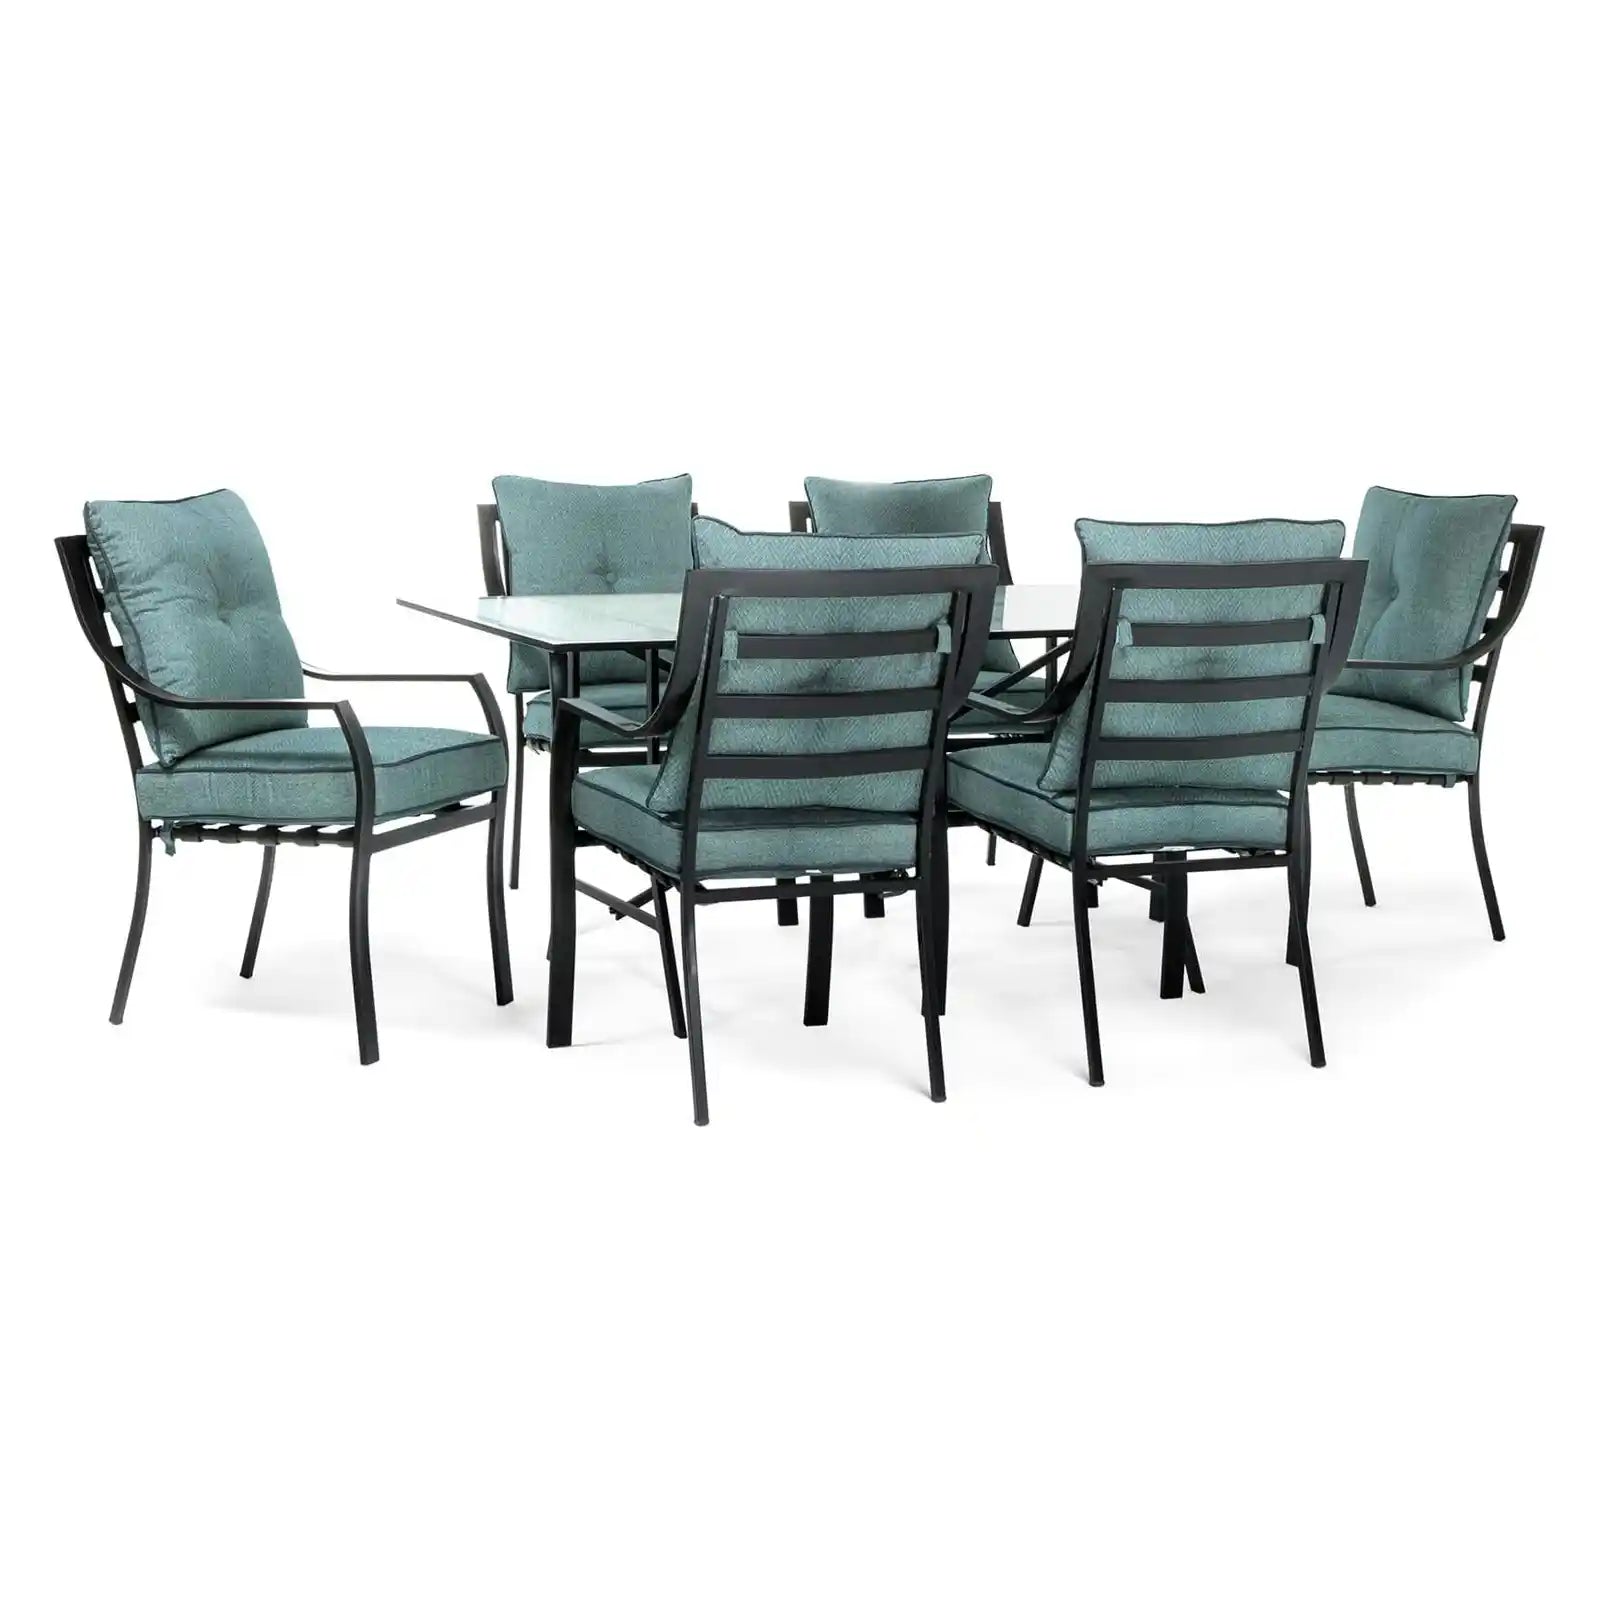 7-Piece Steel Outdoor Patio Dining Set with Ocean Blue Cushions, 6 Dining Chairs and Tempered Glass Rectangular Dining Table